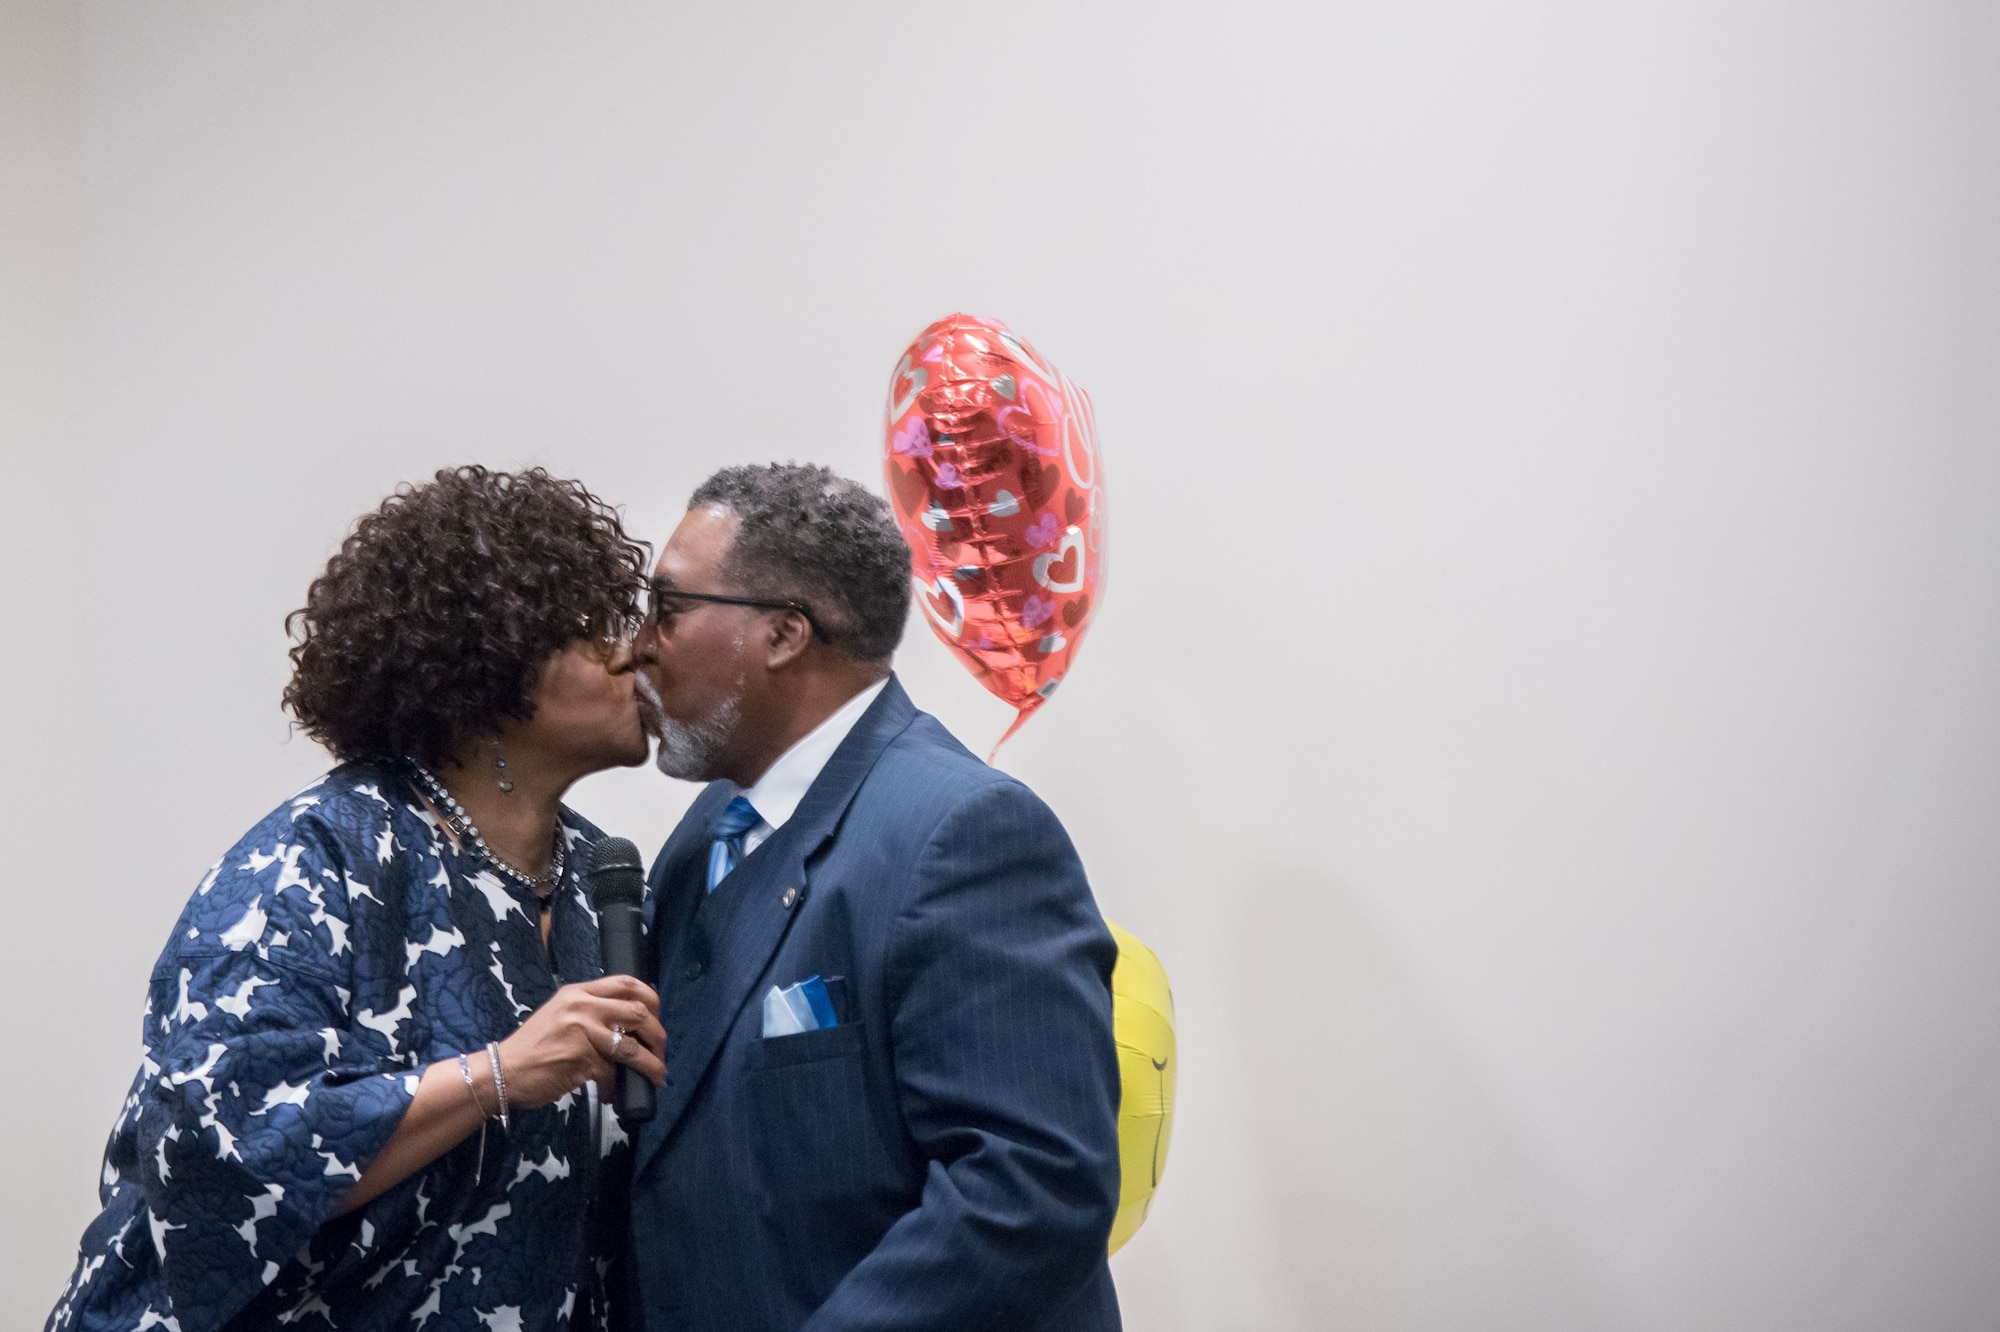 YoLanda Wallace, 81st Mission Support Group, kisses her husband, Gary Wallace, 53rd Weather Reconnaissance Squadron aviation resources management technician, during his retirement ceremony Feb. 2, 2018 at Keesler Air Force Base, Mississippi. (U.S. Air Force photo by Staff Sgt. Heather Heiney)